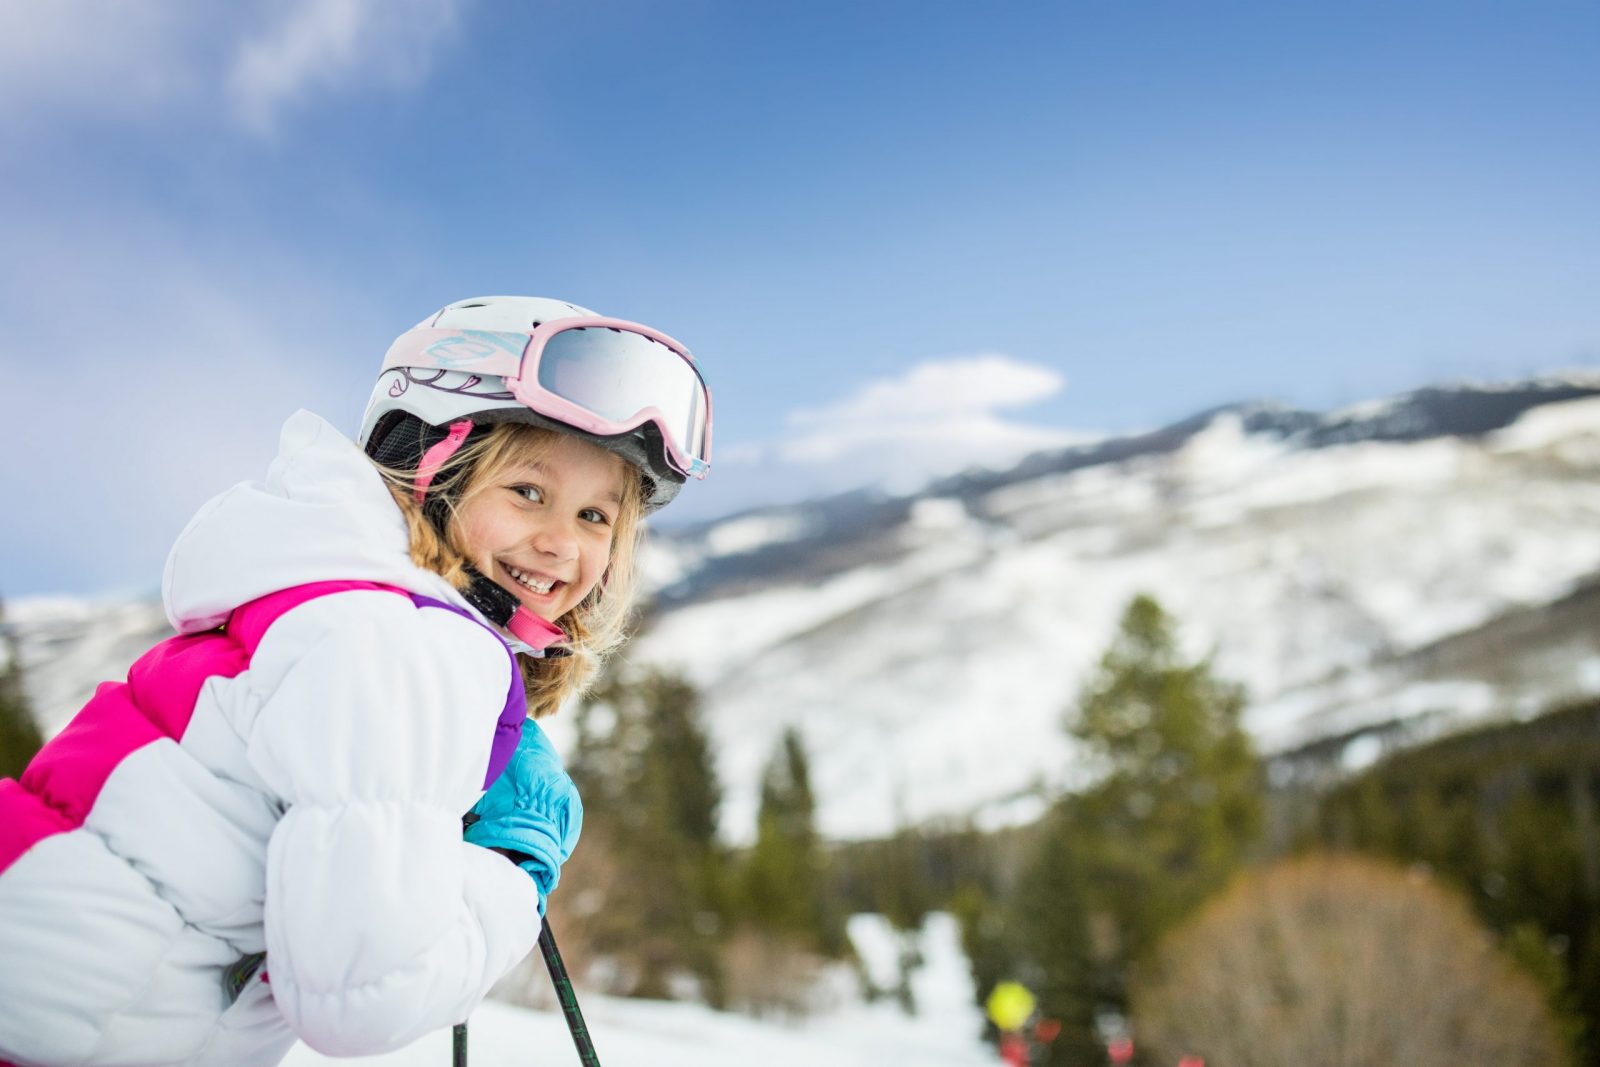 Family enjoys a day skiing on the mountain in Vail, CO. Photo: Craig Orsini. Vail Resorts. The Must-Read Guide to Vail.